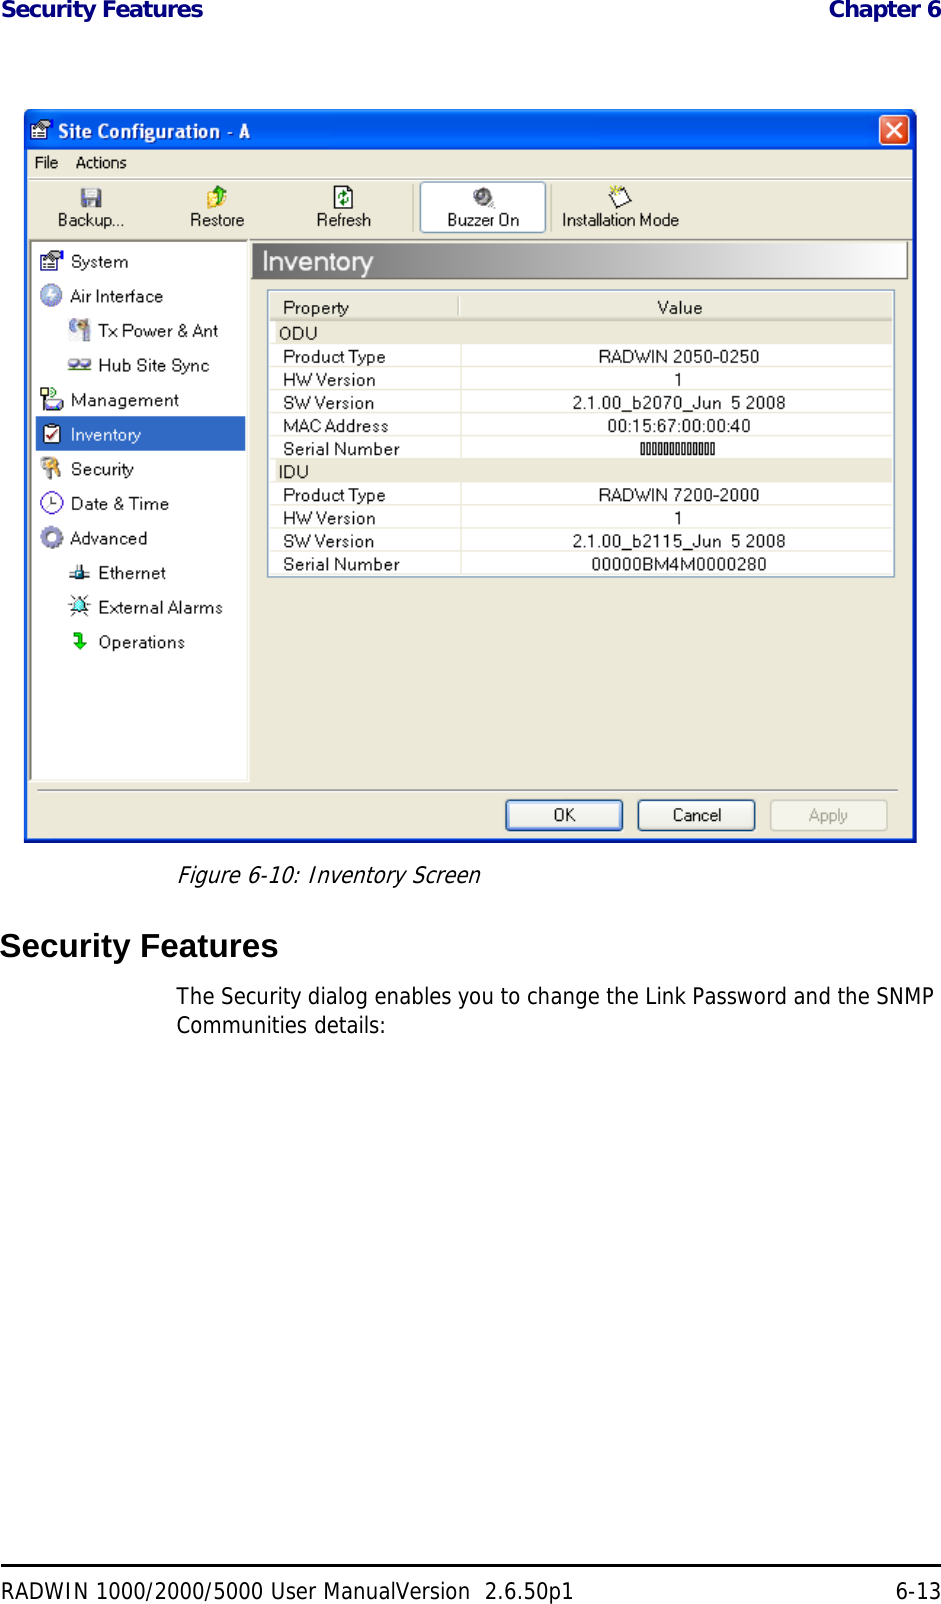 Security Features  Chapter 6RADWIN 1000/2000/5000 User ManualVersion  2.6.50p1 6-13Figure 6-10: Inventory ScreenSecurity FeaturesThe Security dialog enables you to change the Link Password and the SNMP Communities details: